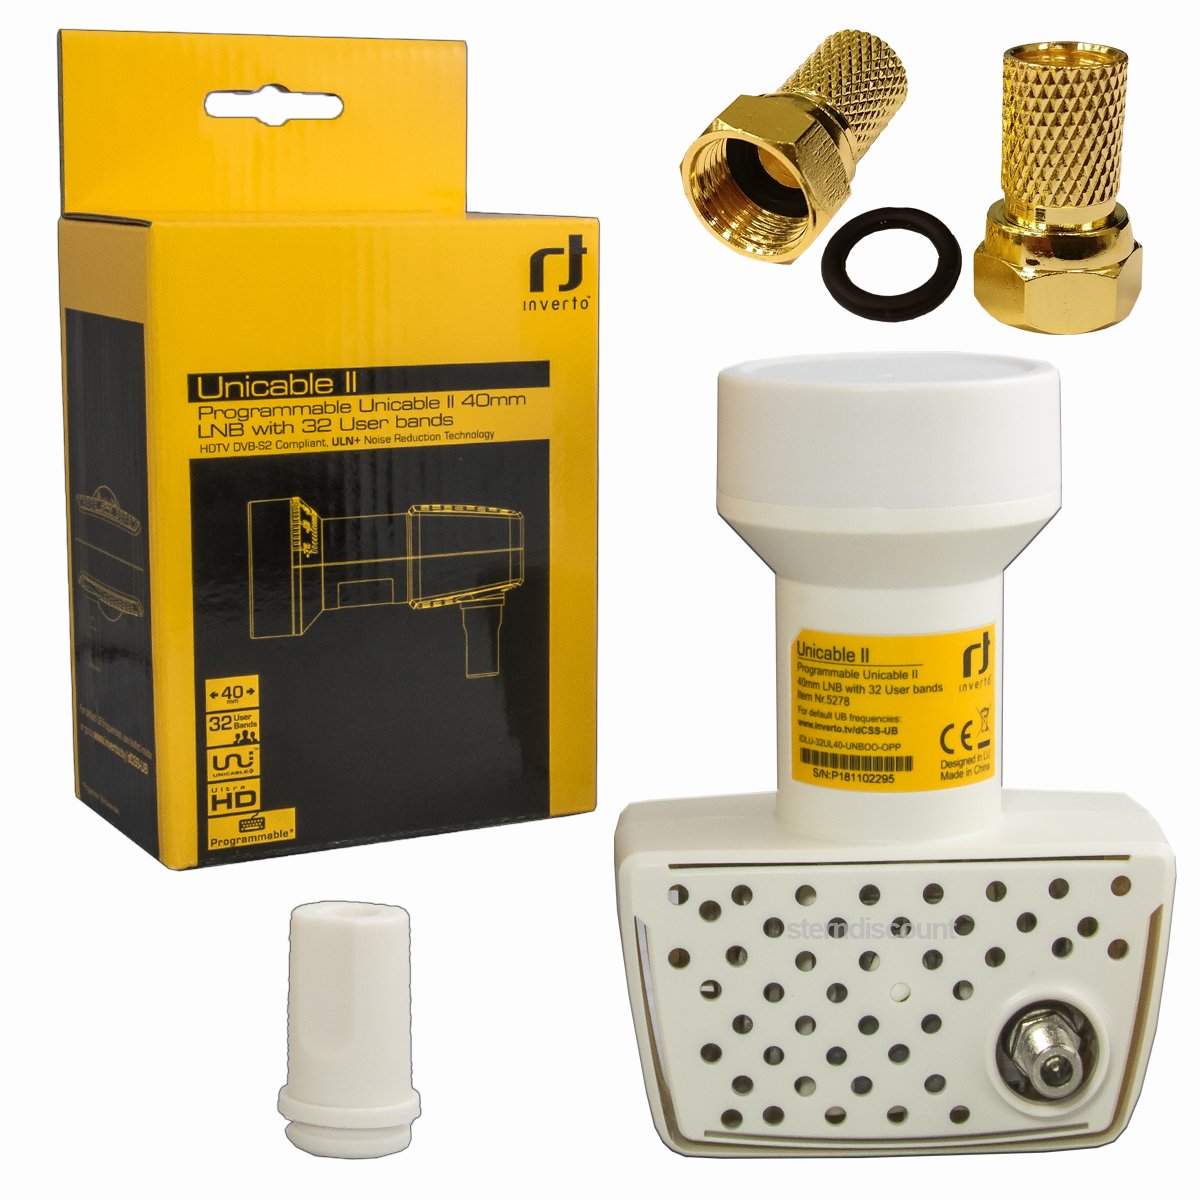 Inverto Unicable 2 LNB